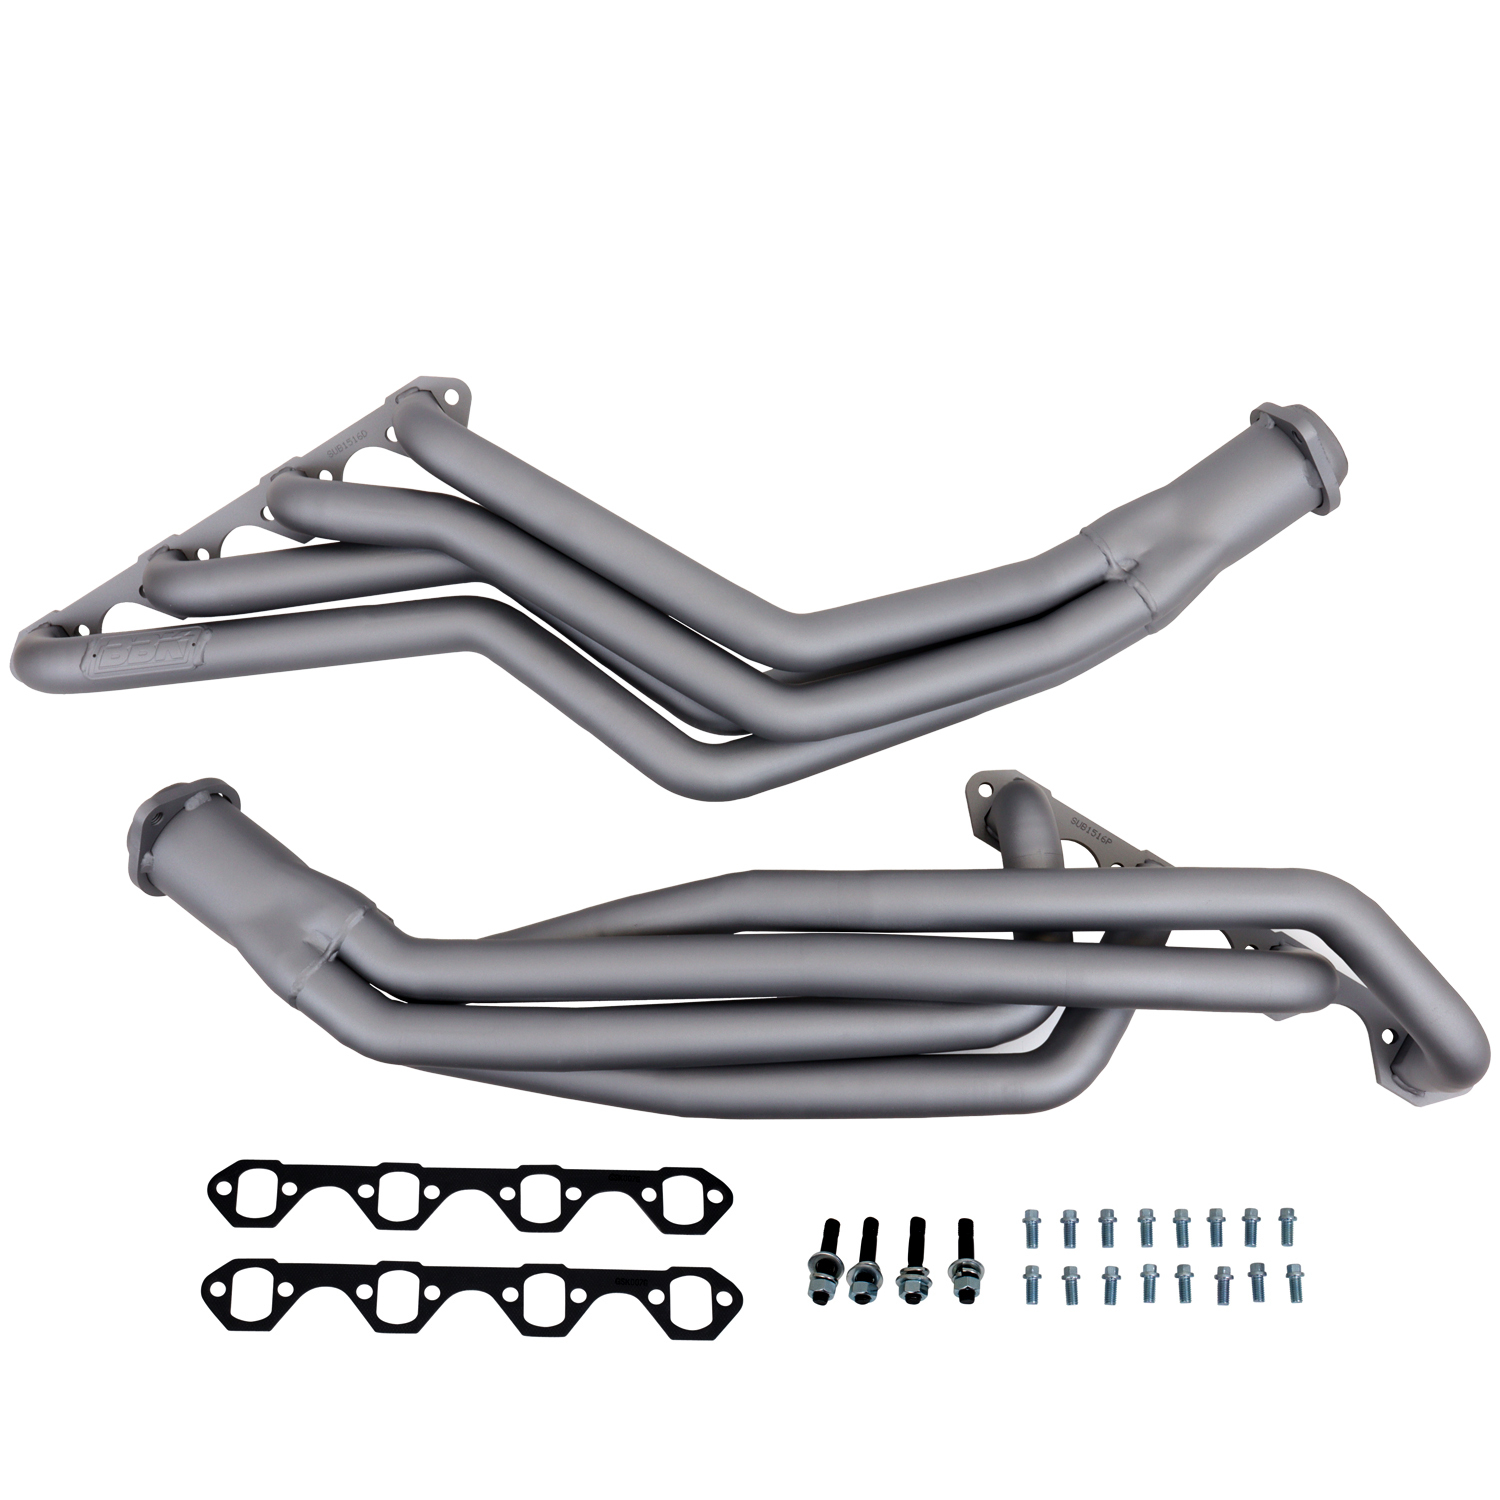 BBK Performance 1516 Headers, Long Tube, 1-5/8 in Primary, 2-1/2 in Collector, Steel, Chrome, Small Block Ford, Ford Mustang 1979-93, Pair